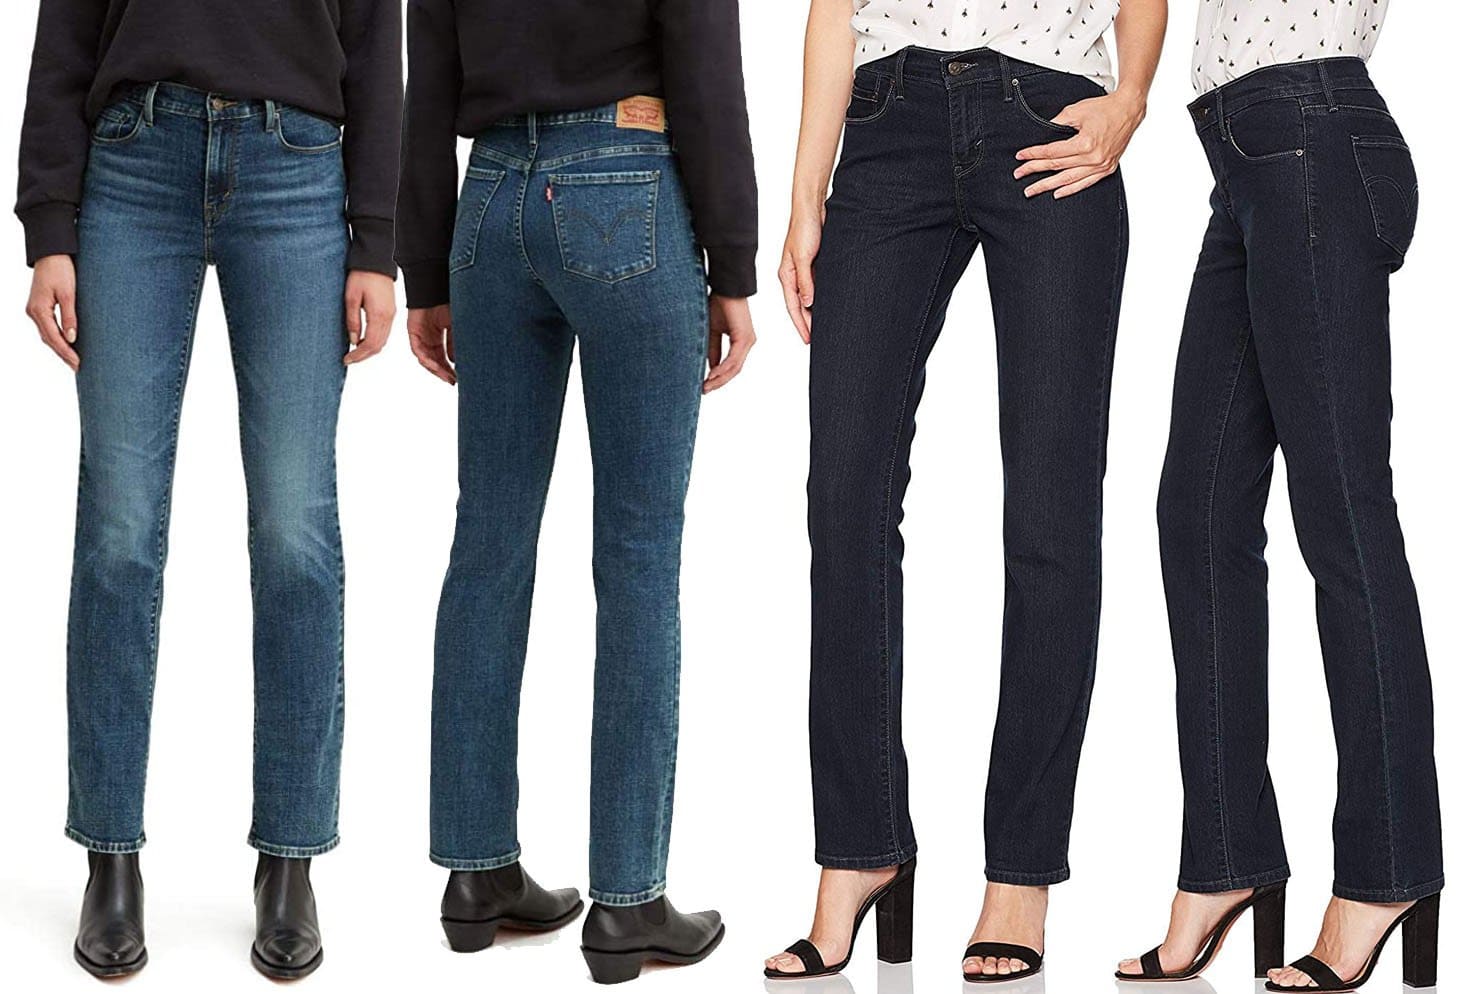 The classic straight 505 jean is made of a cotton-polyester blend with elastane, giving a structured yet stretchy fit